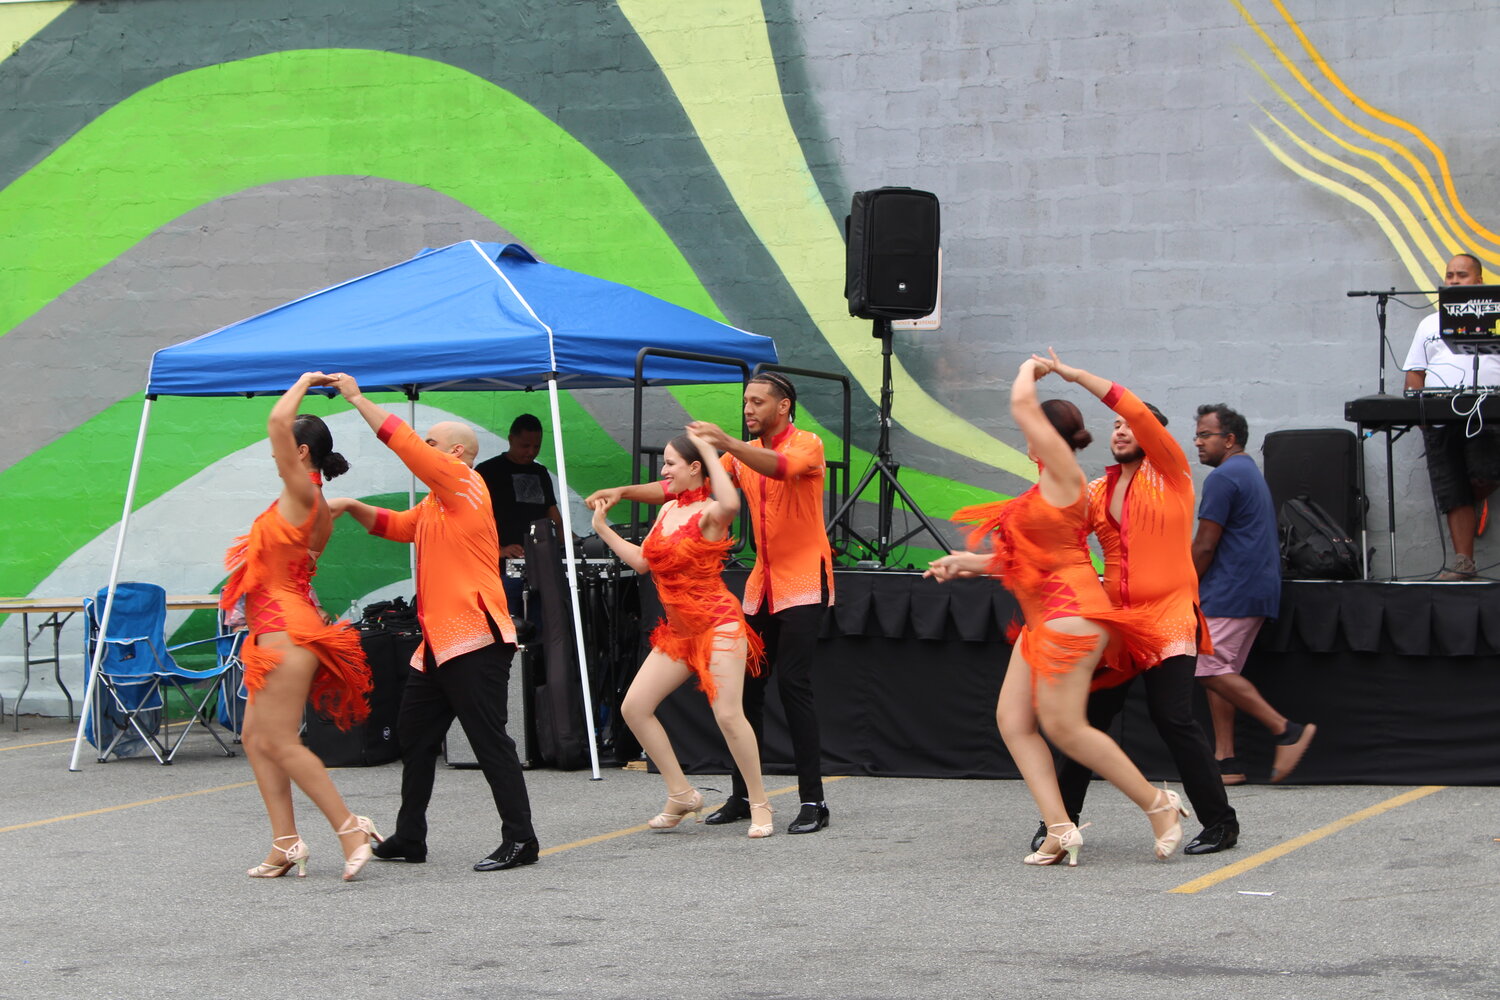 Dance performances, music, and more are all part of the fun at the Pawtucket Arts Festival, September 1-10